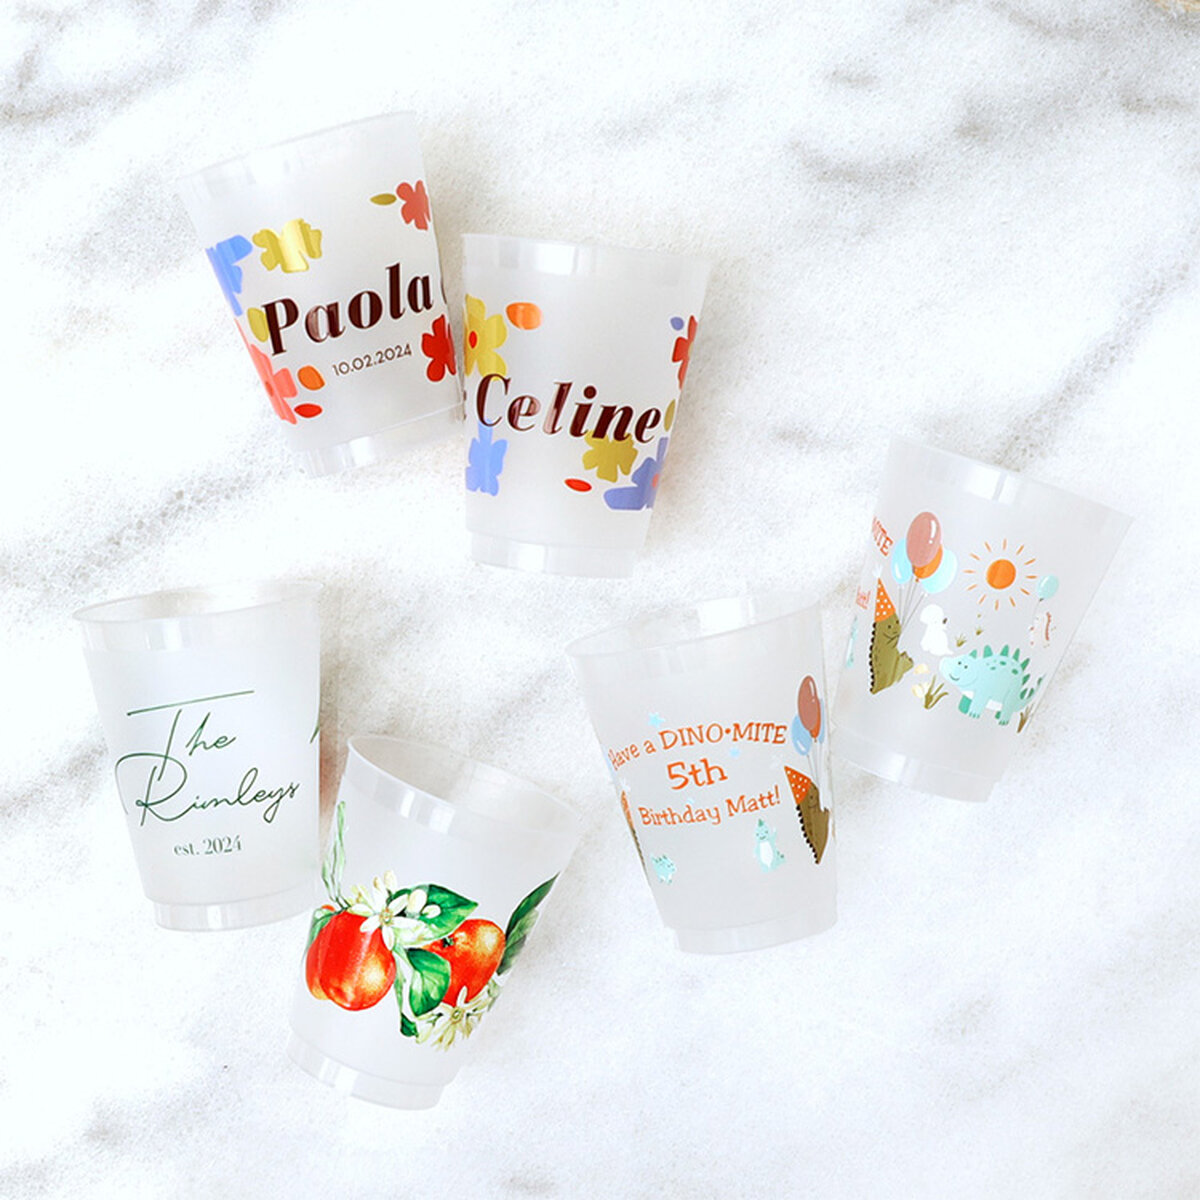 Custom Plastic Cups, Personalized Party Cups, Personalized 30th